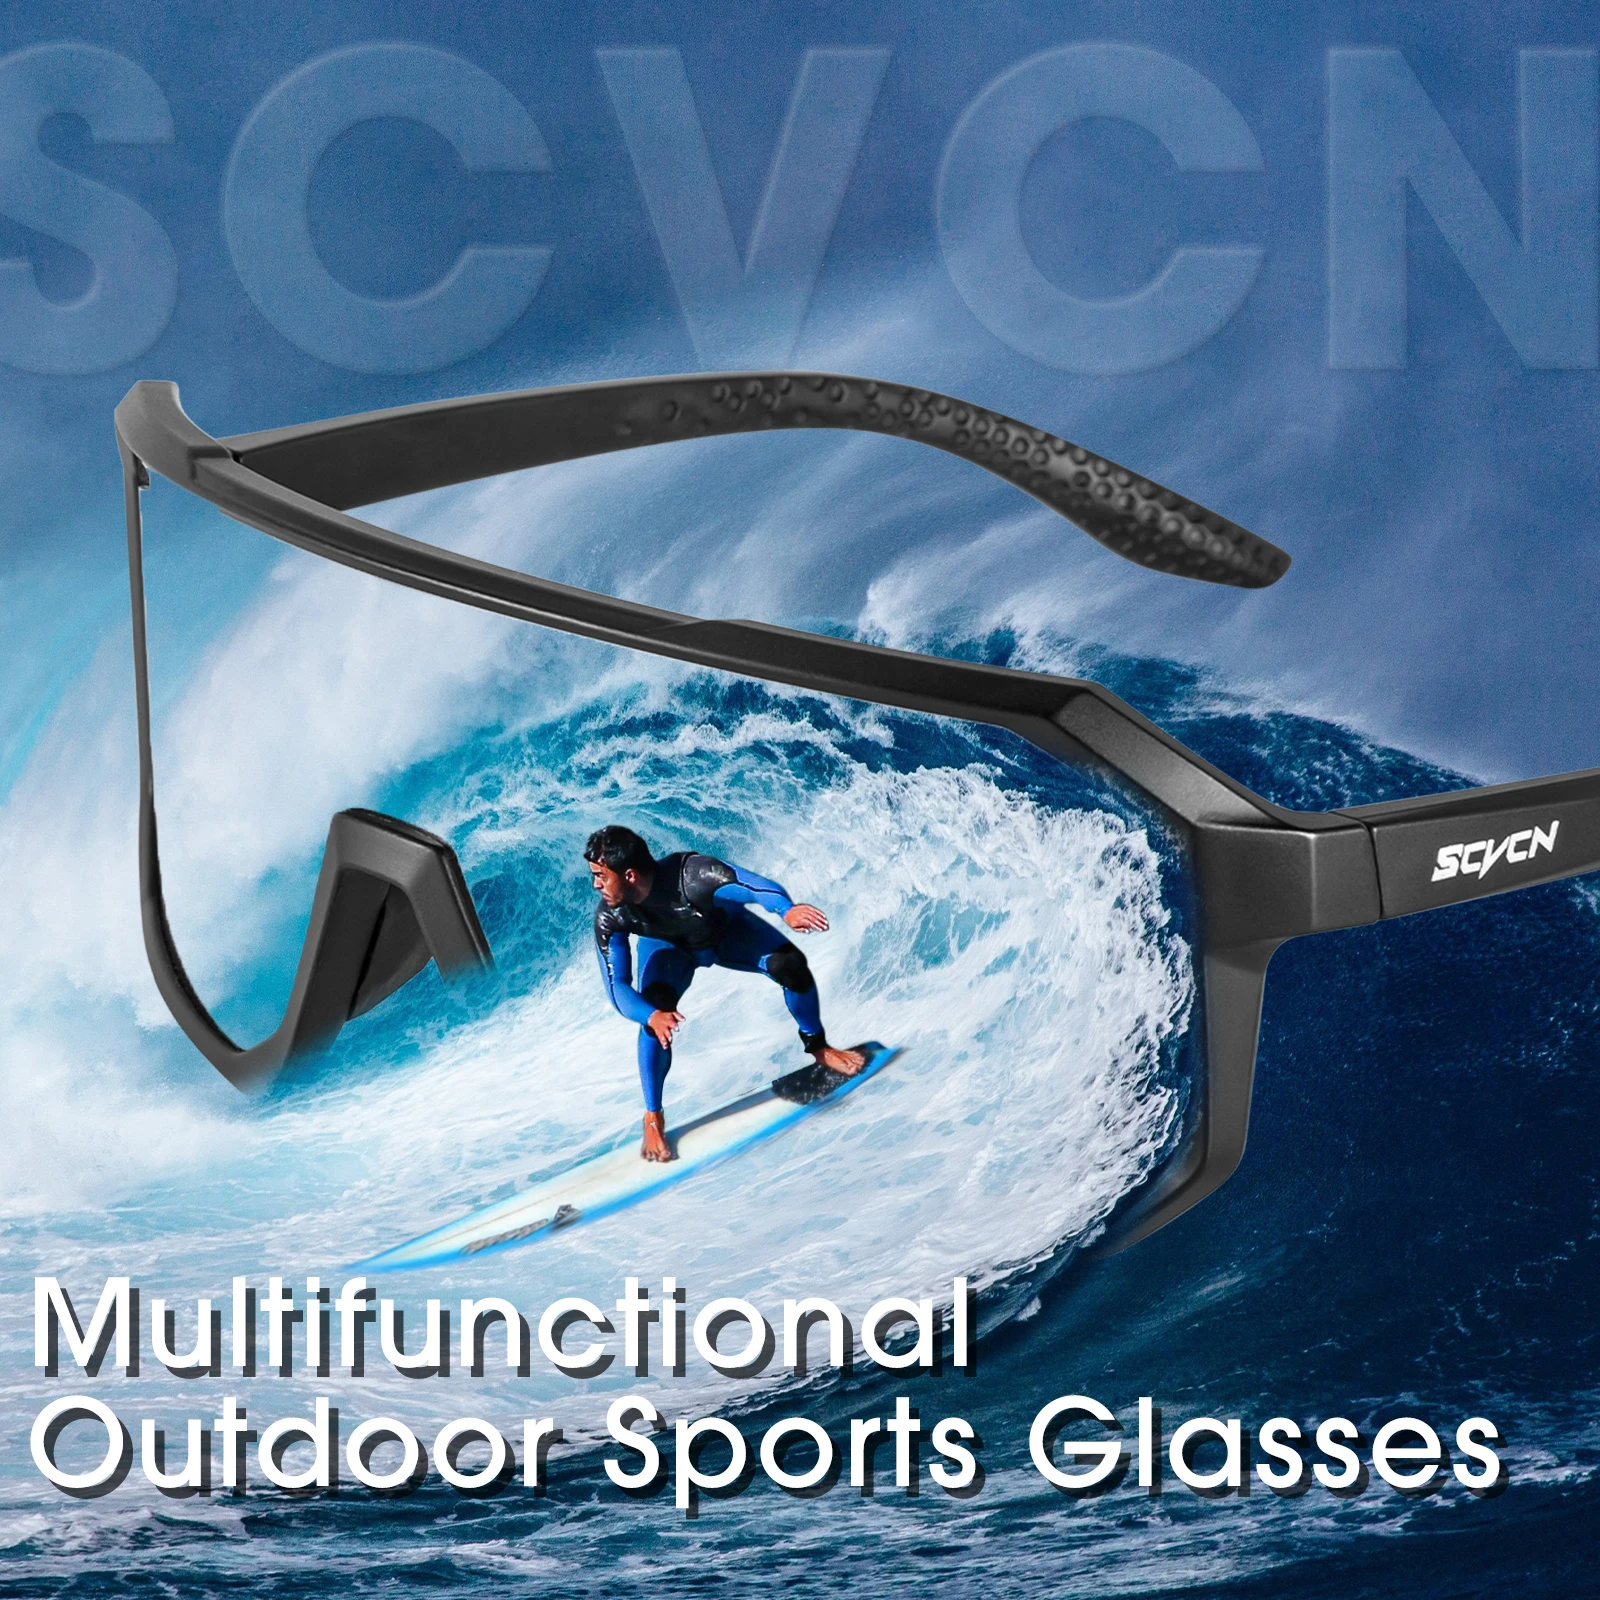 SCVCN Mountain Bicycle Glasses Sport Men Sunglasses Cycling